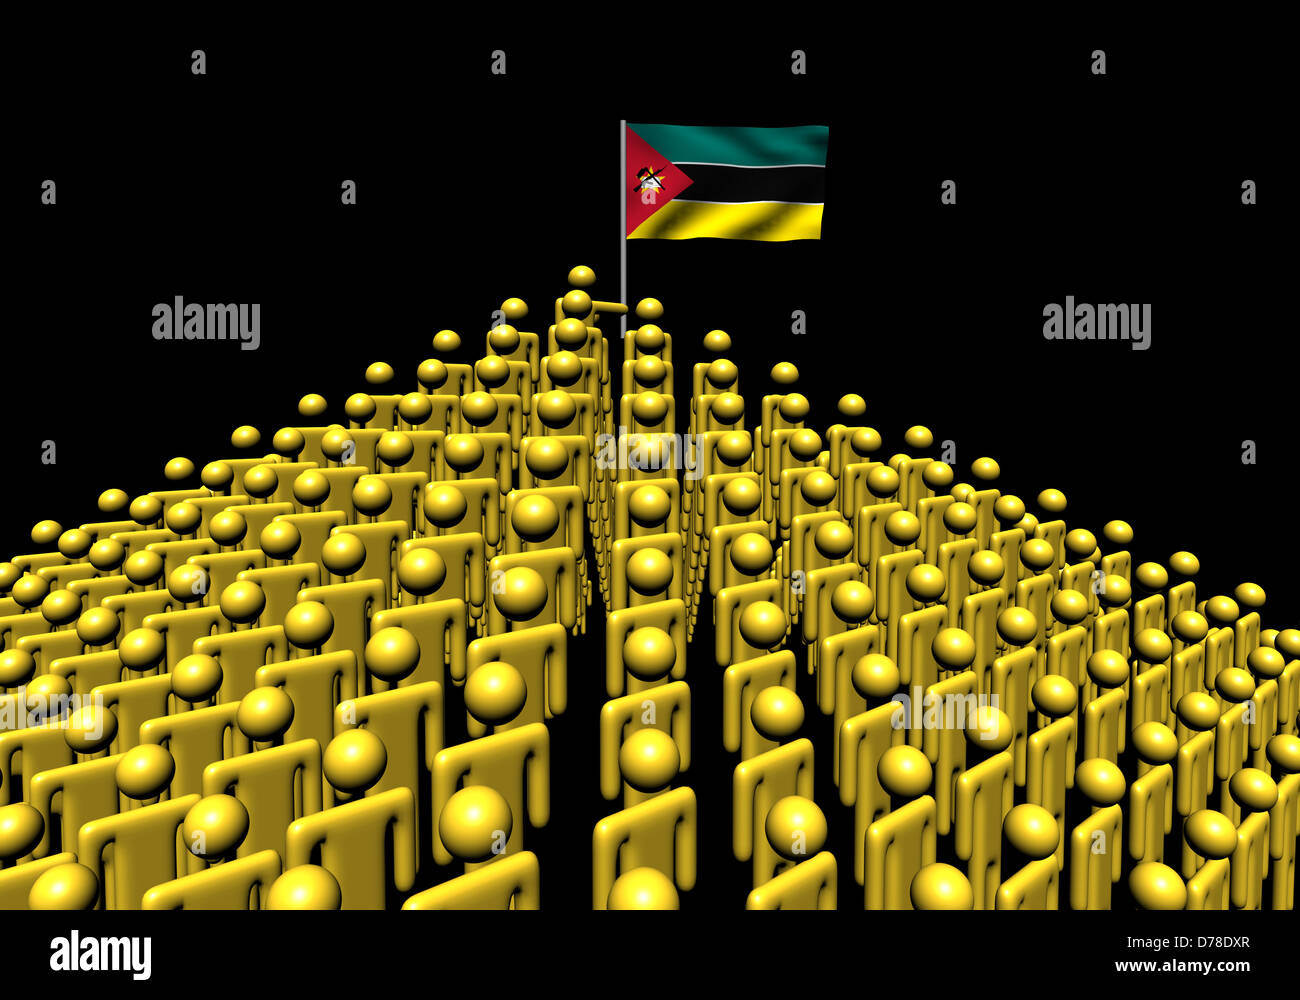 Pyramid of abstract people with Mozambique flag illustration Stock Photo